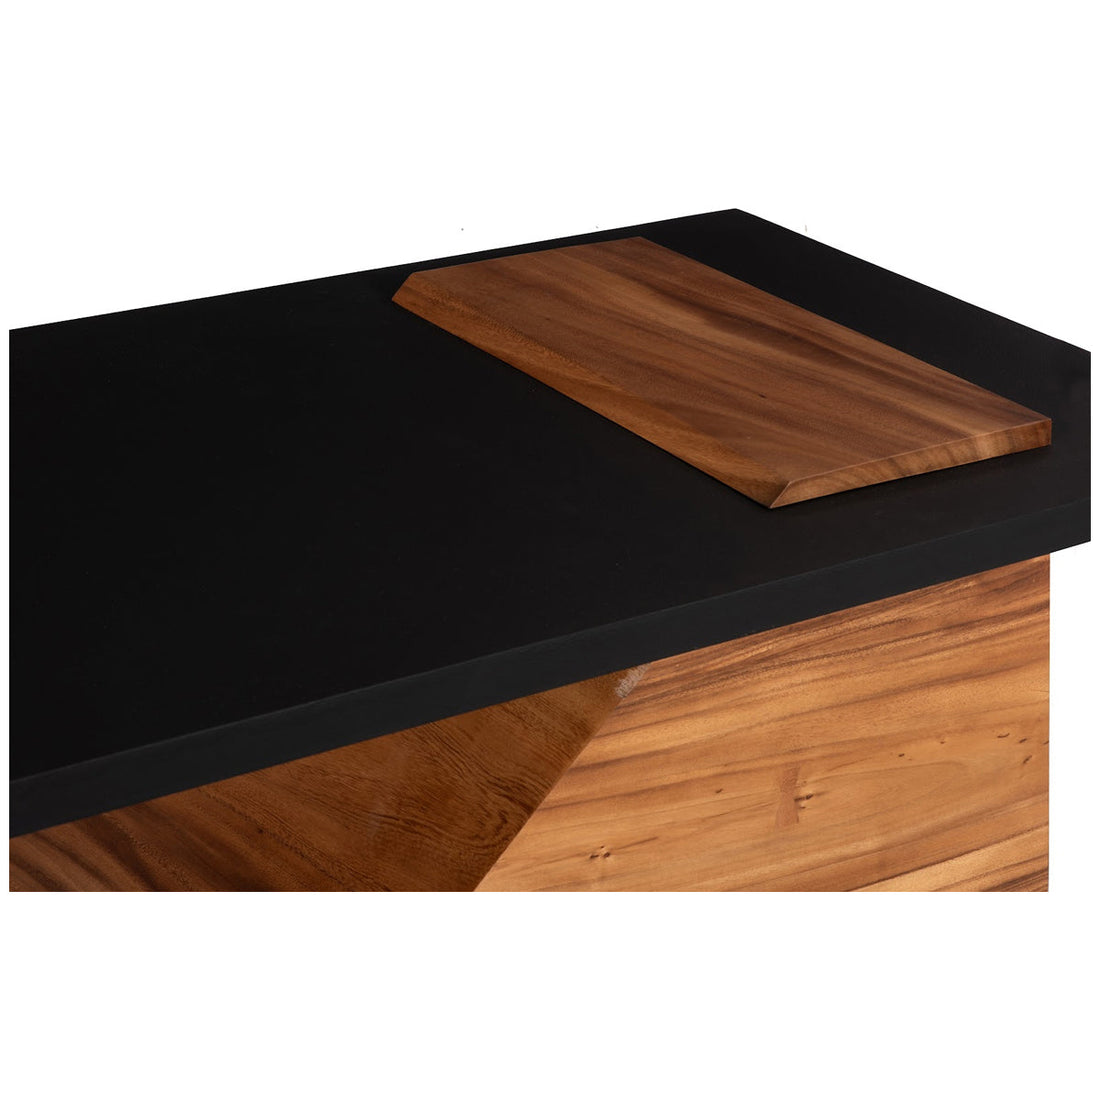 Phillips Collection Slant Coffee Table